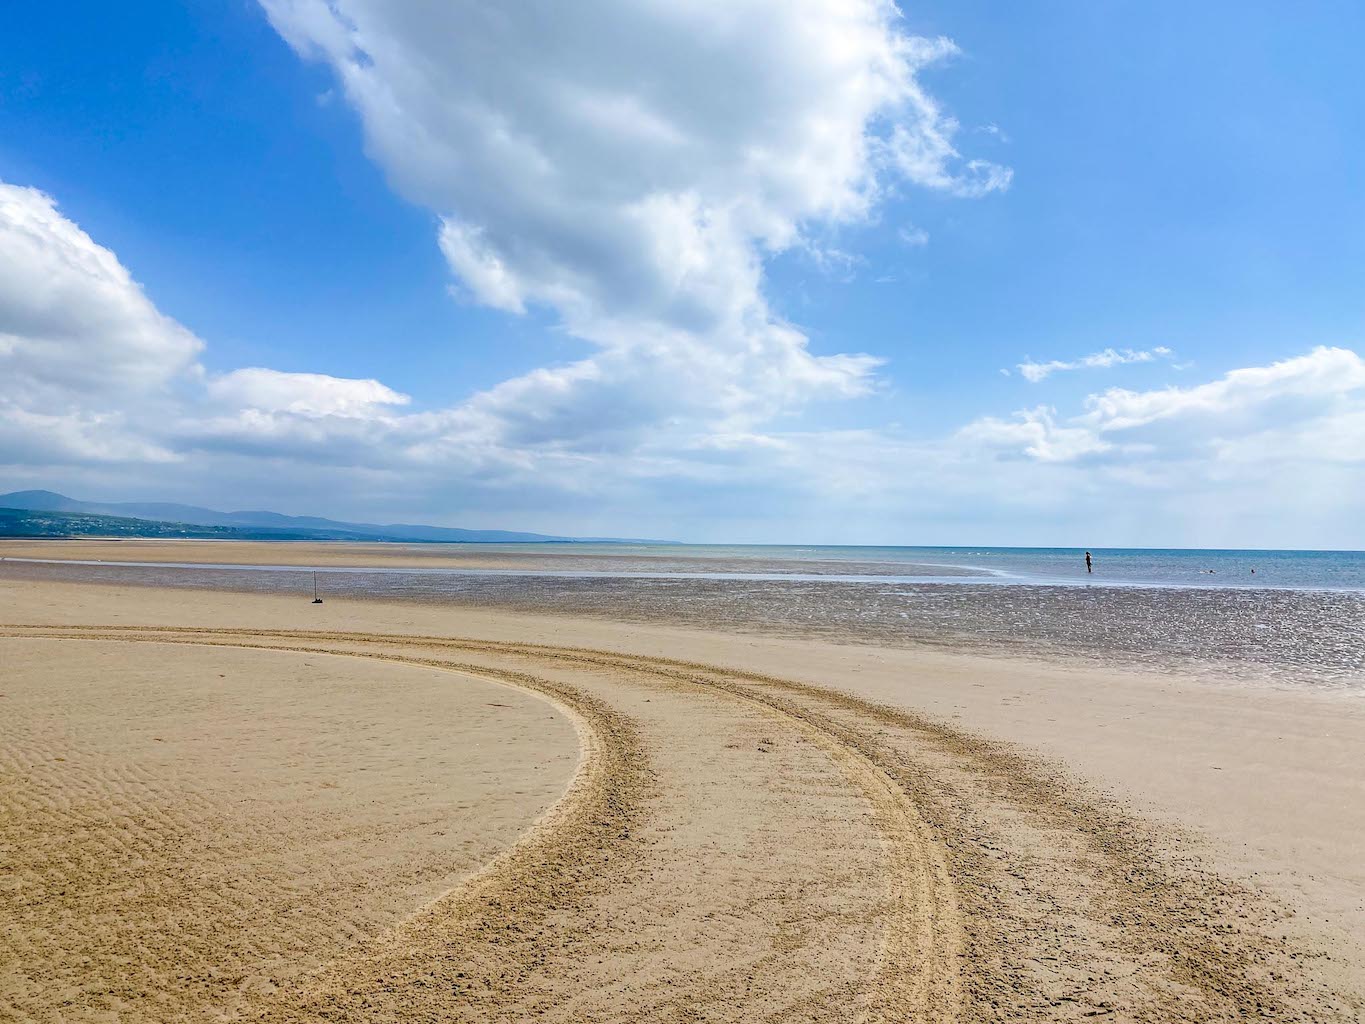 places to visit in North Wales, Black Rock Sands Beach with tyre marks on sand